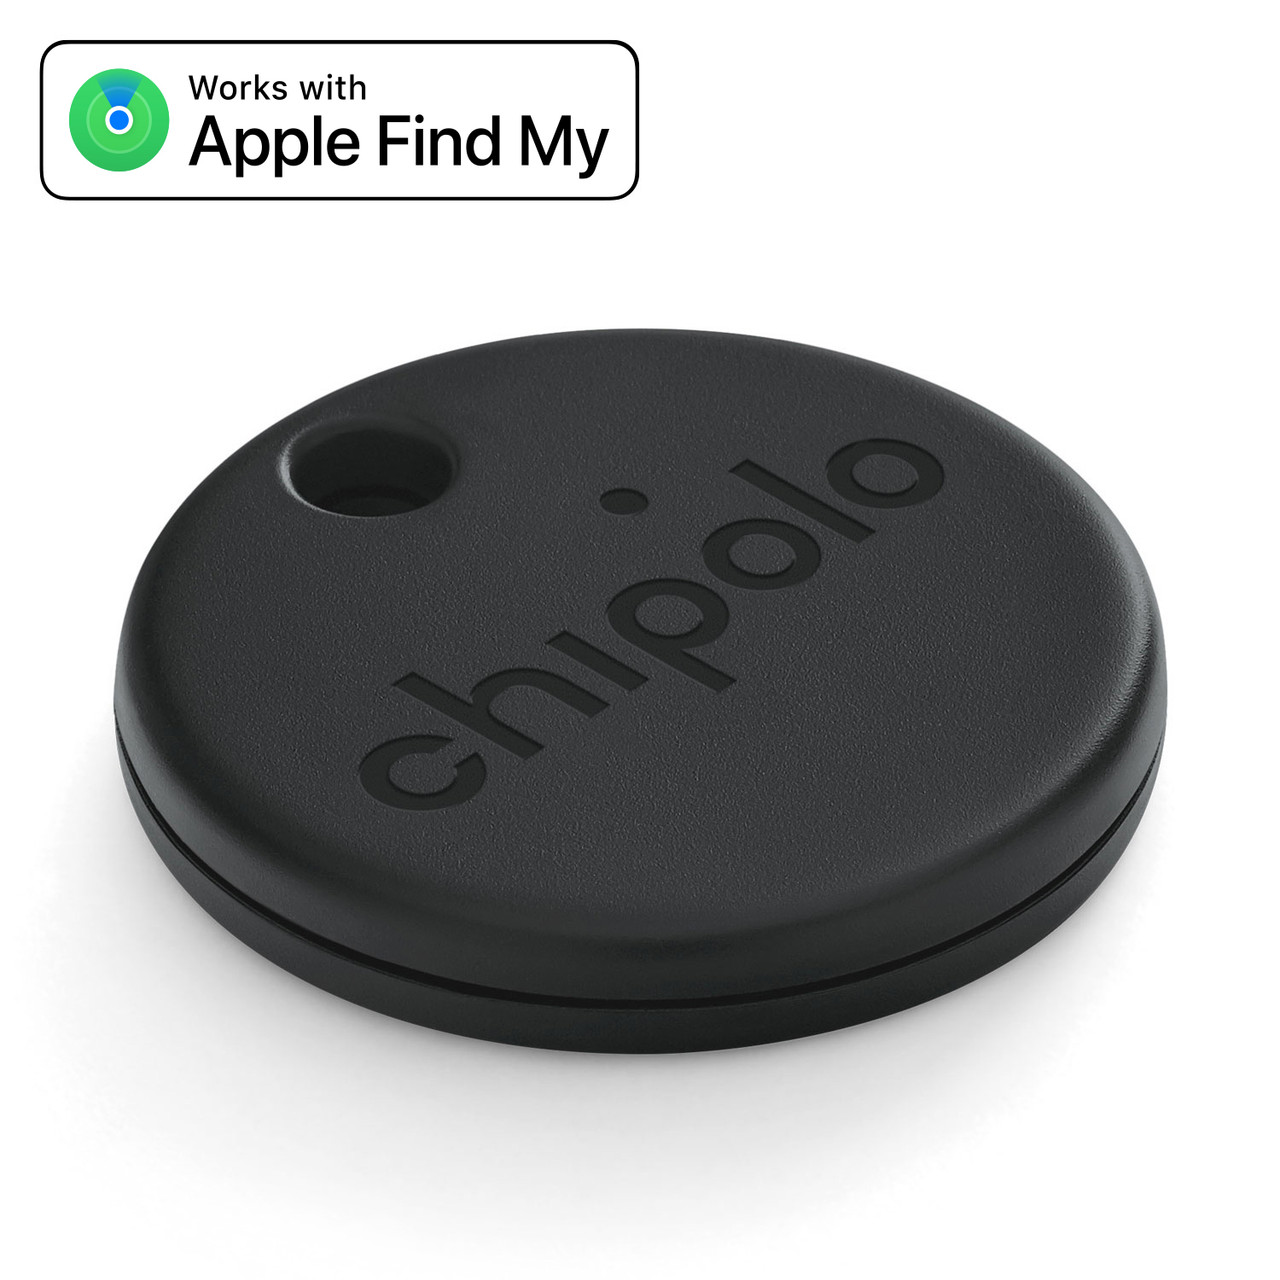 Chipolo ONE Spot - Works with the Apple Find My Network